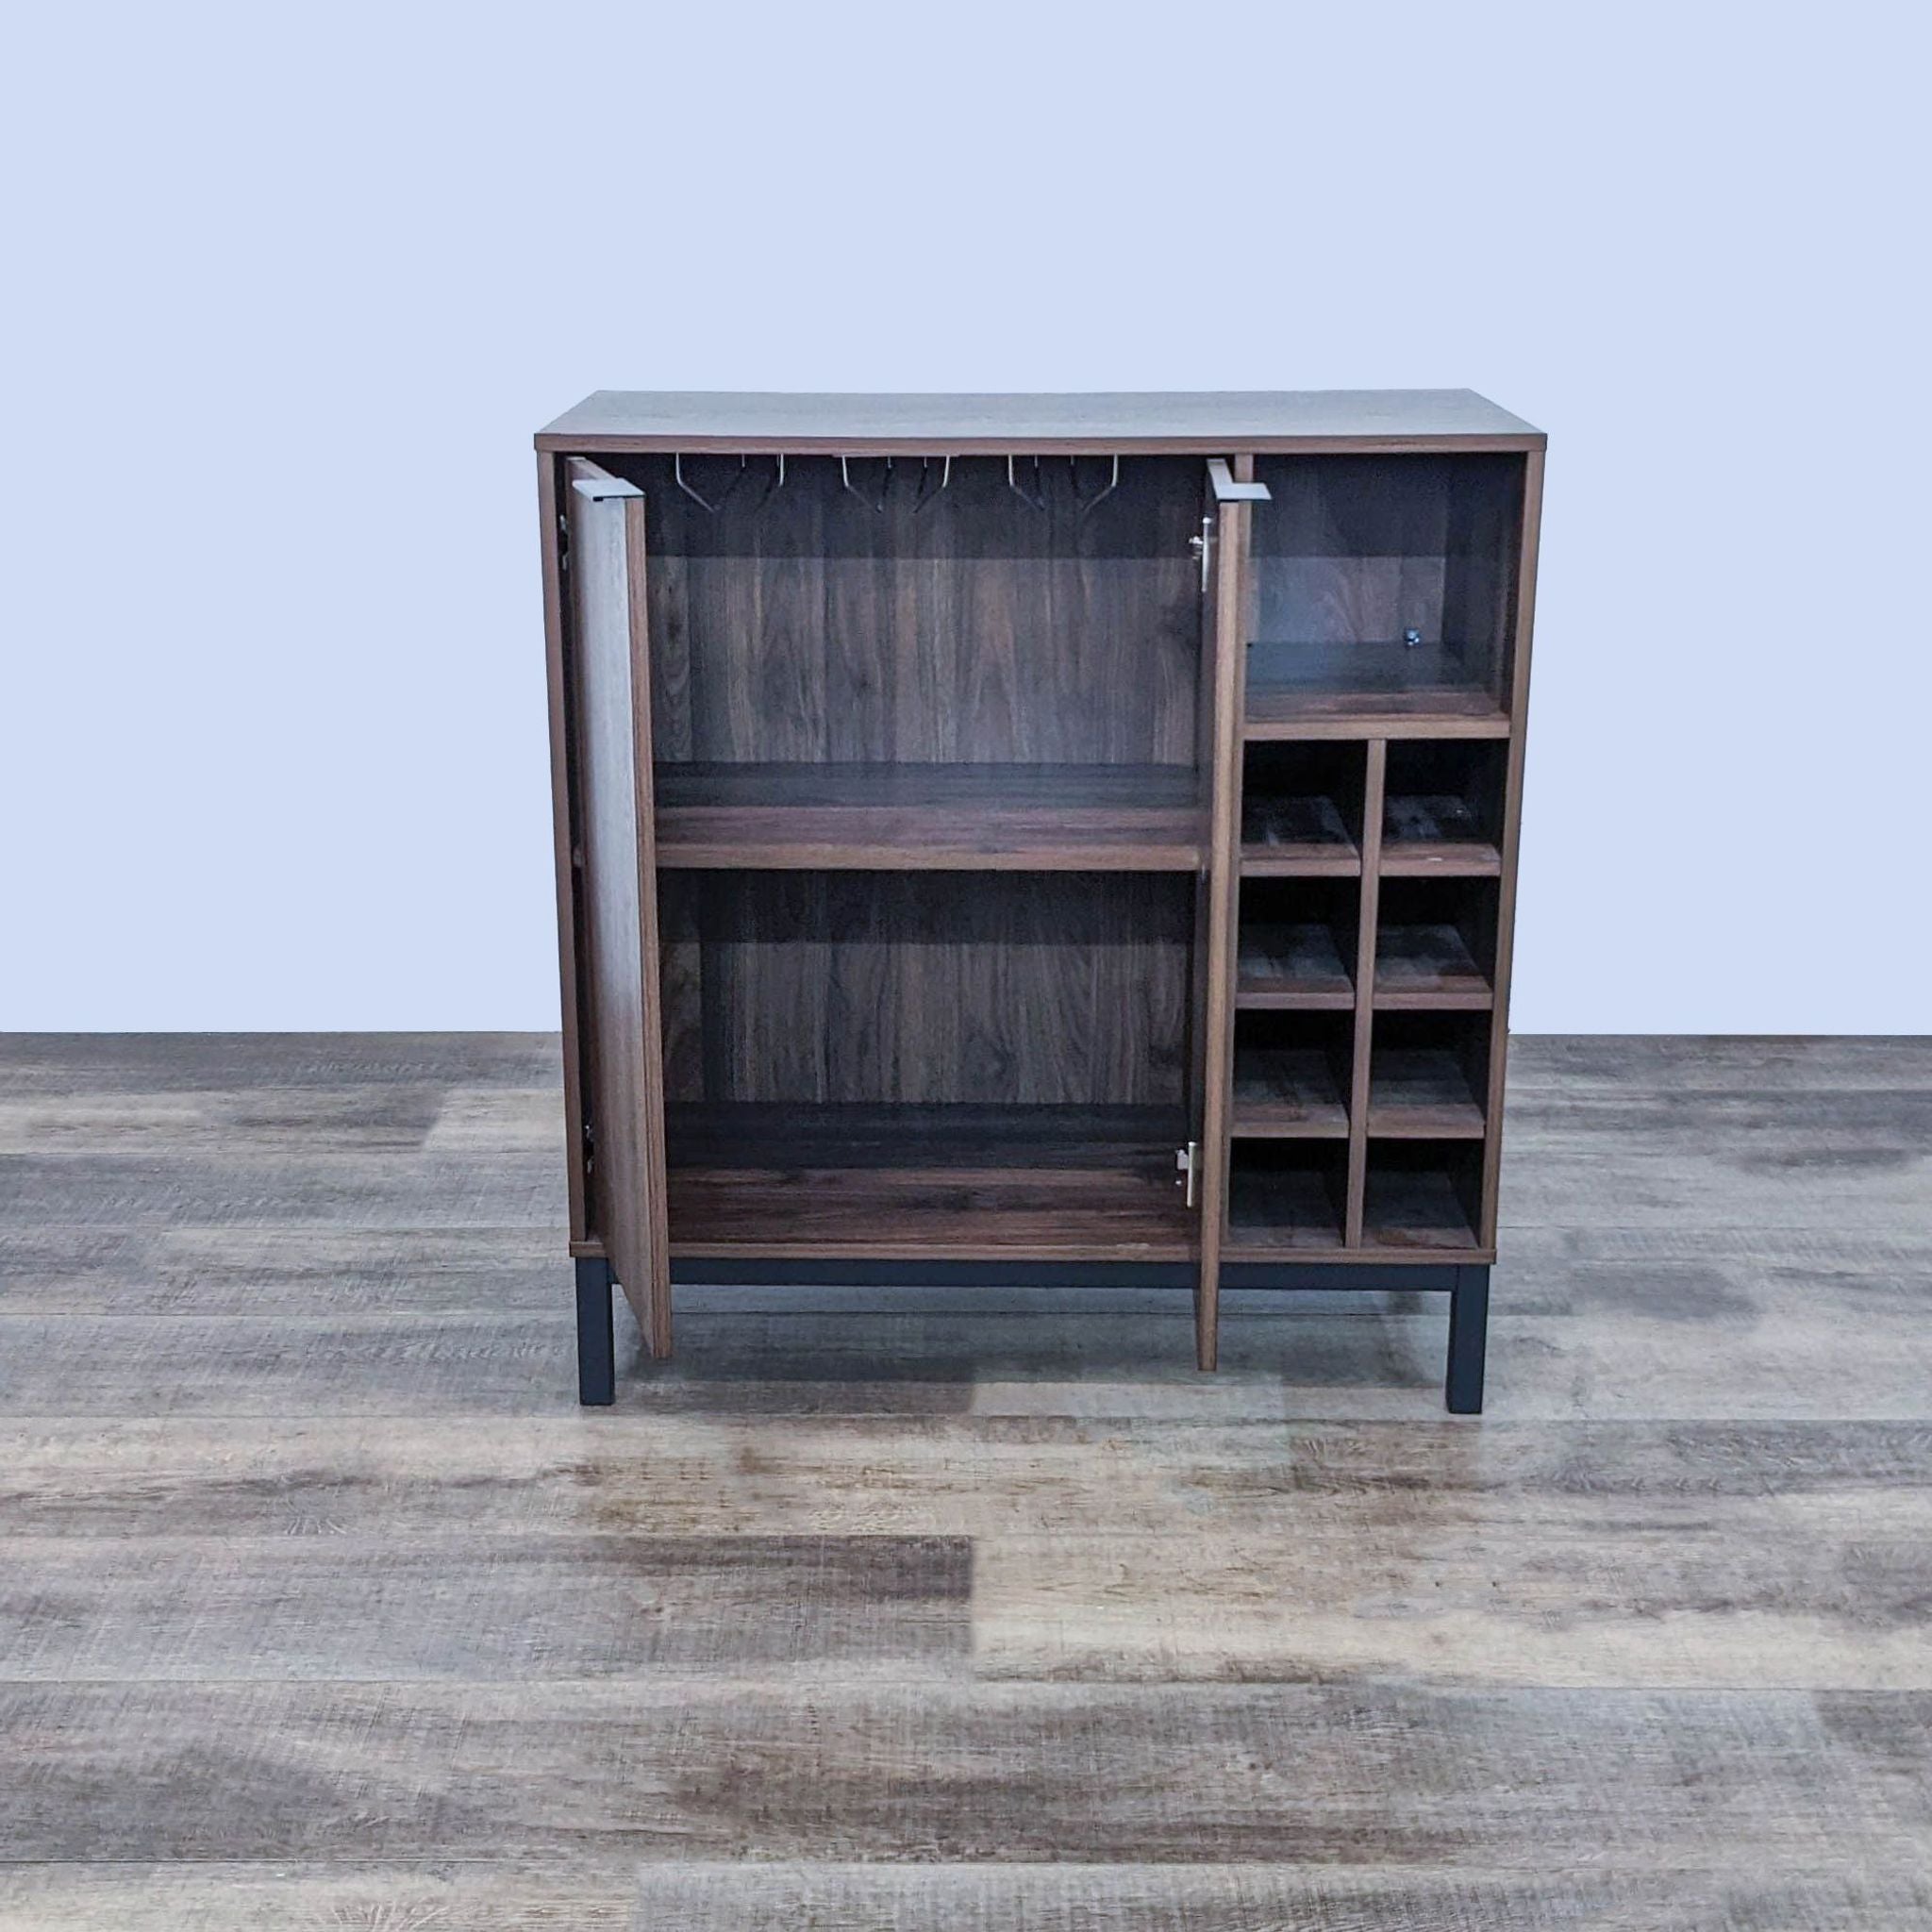 Alt text 2: Open cabinet from Walker Edison with dark wood finish, showing spacious interior, shelves, and a manufacturer's caution label.